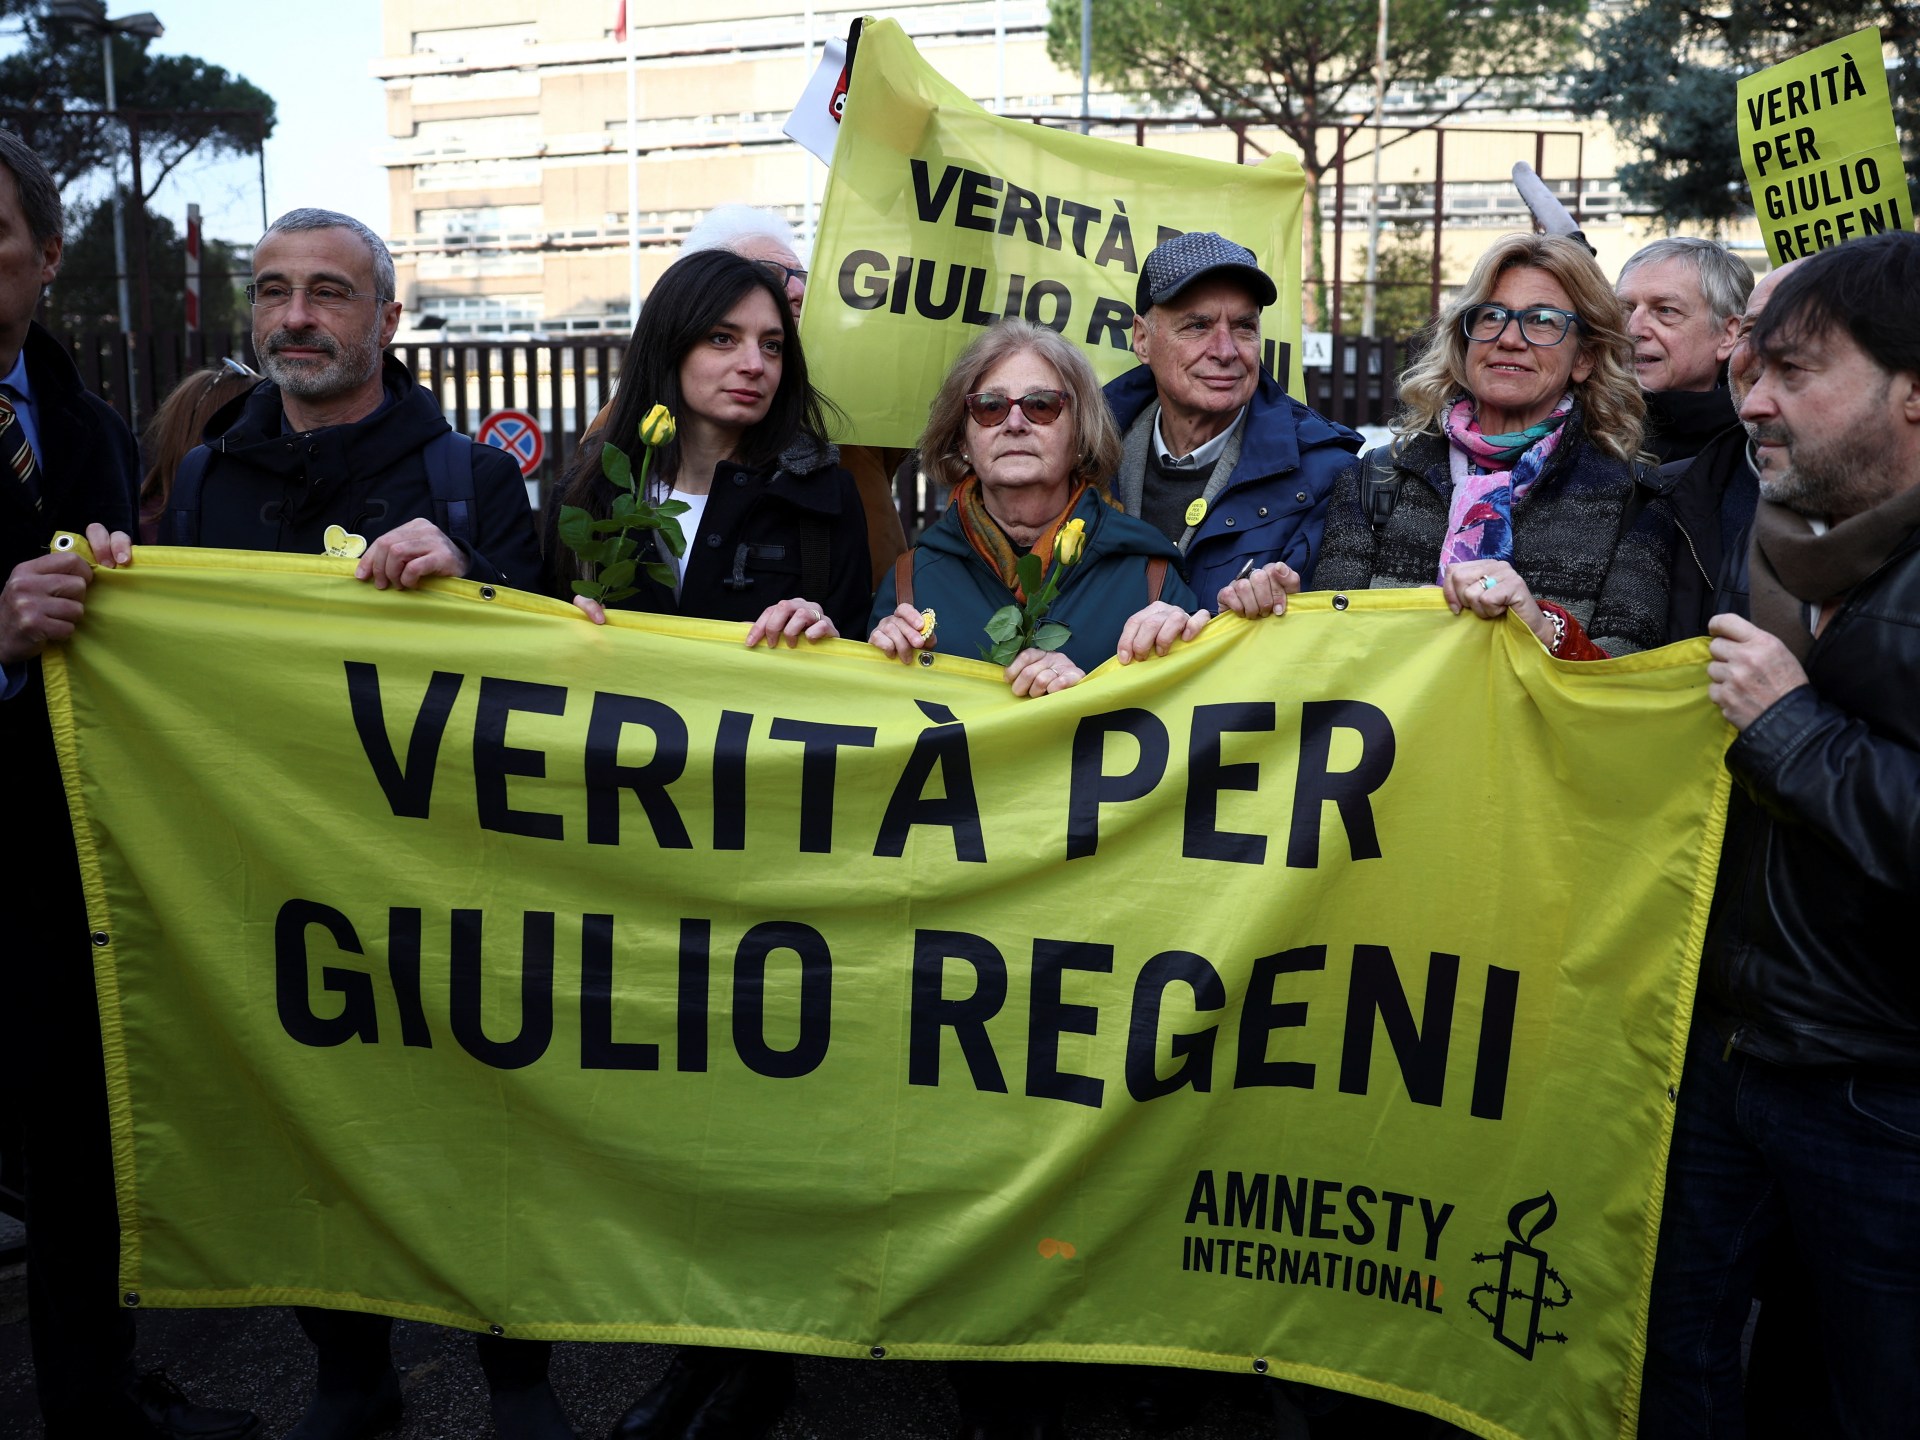 Four Egyptian officials back on trial in Italy over death of Giulio Regeni | Courts News